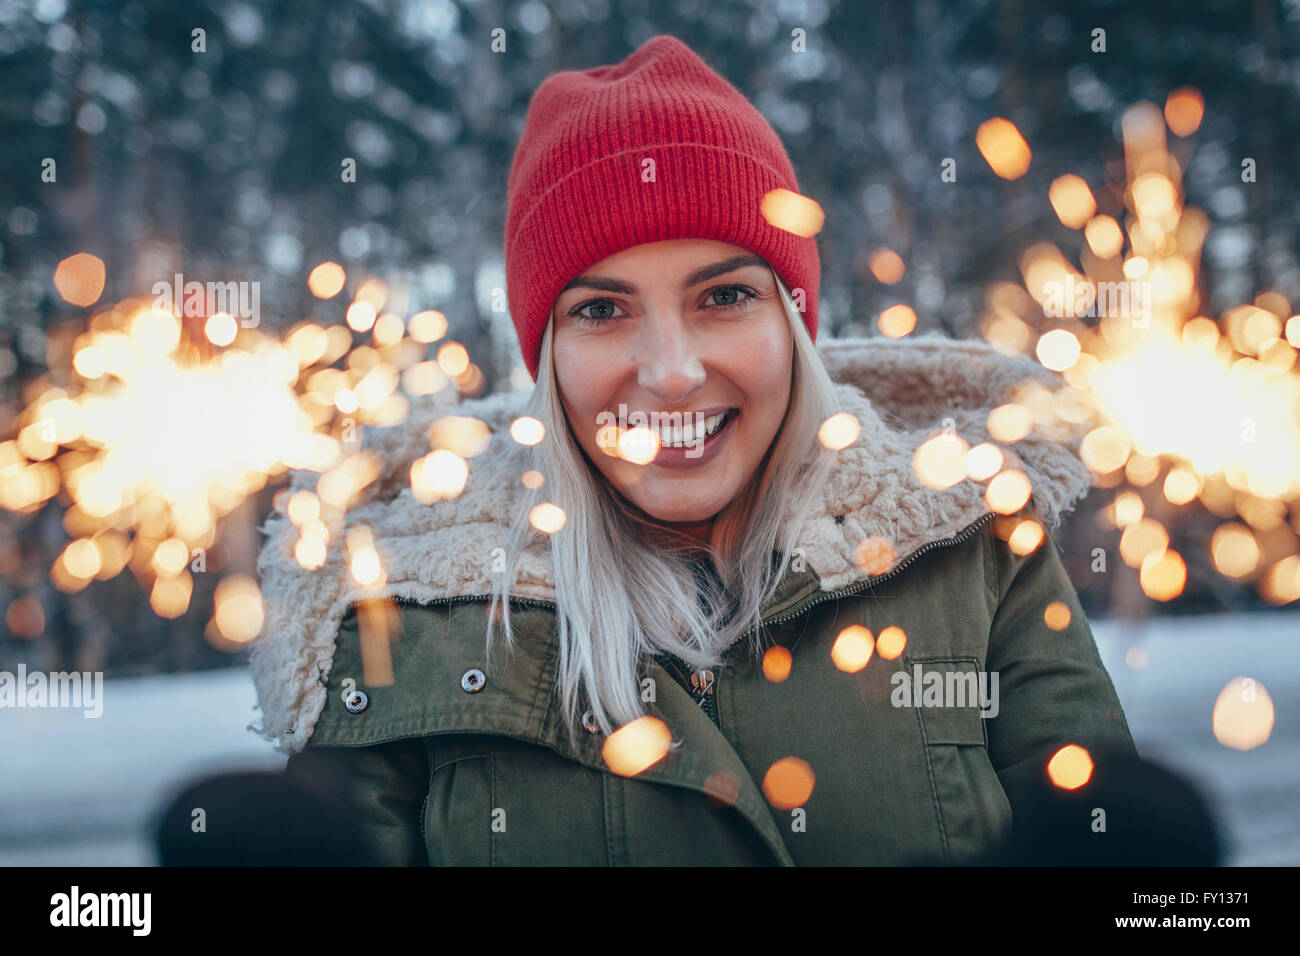 Portrait of smiling woman holding sparklers during winter Stock Photo